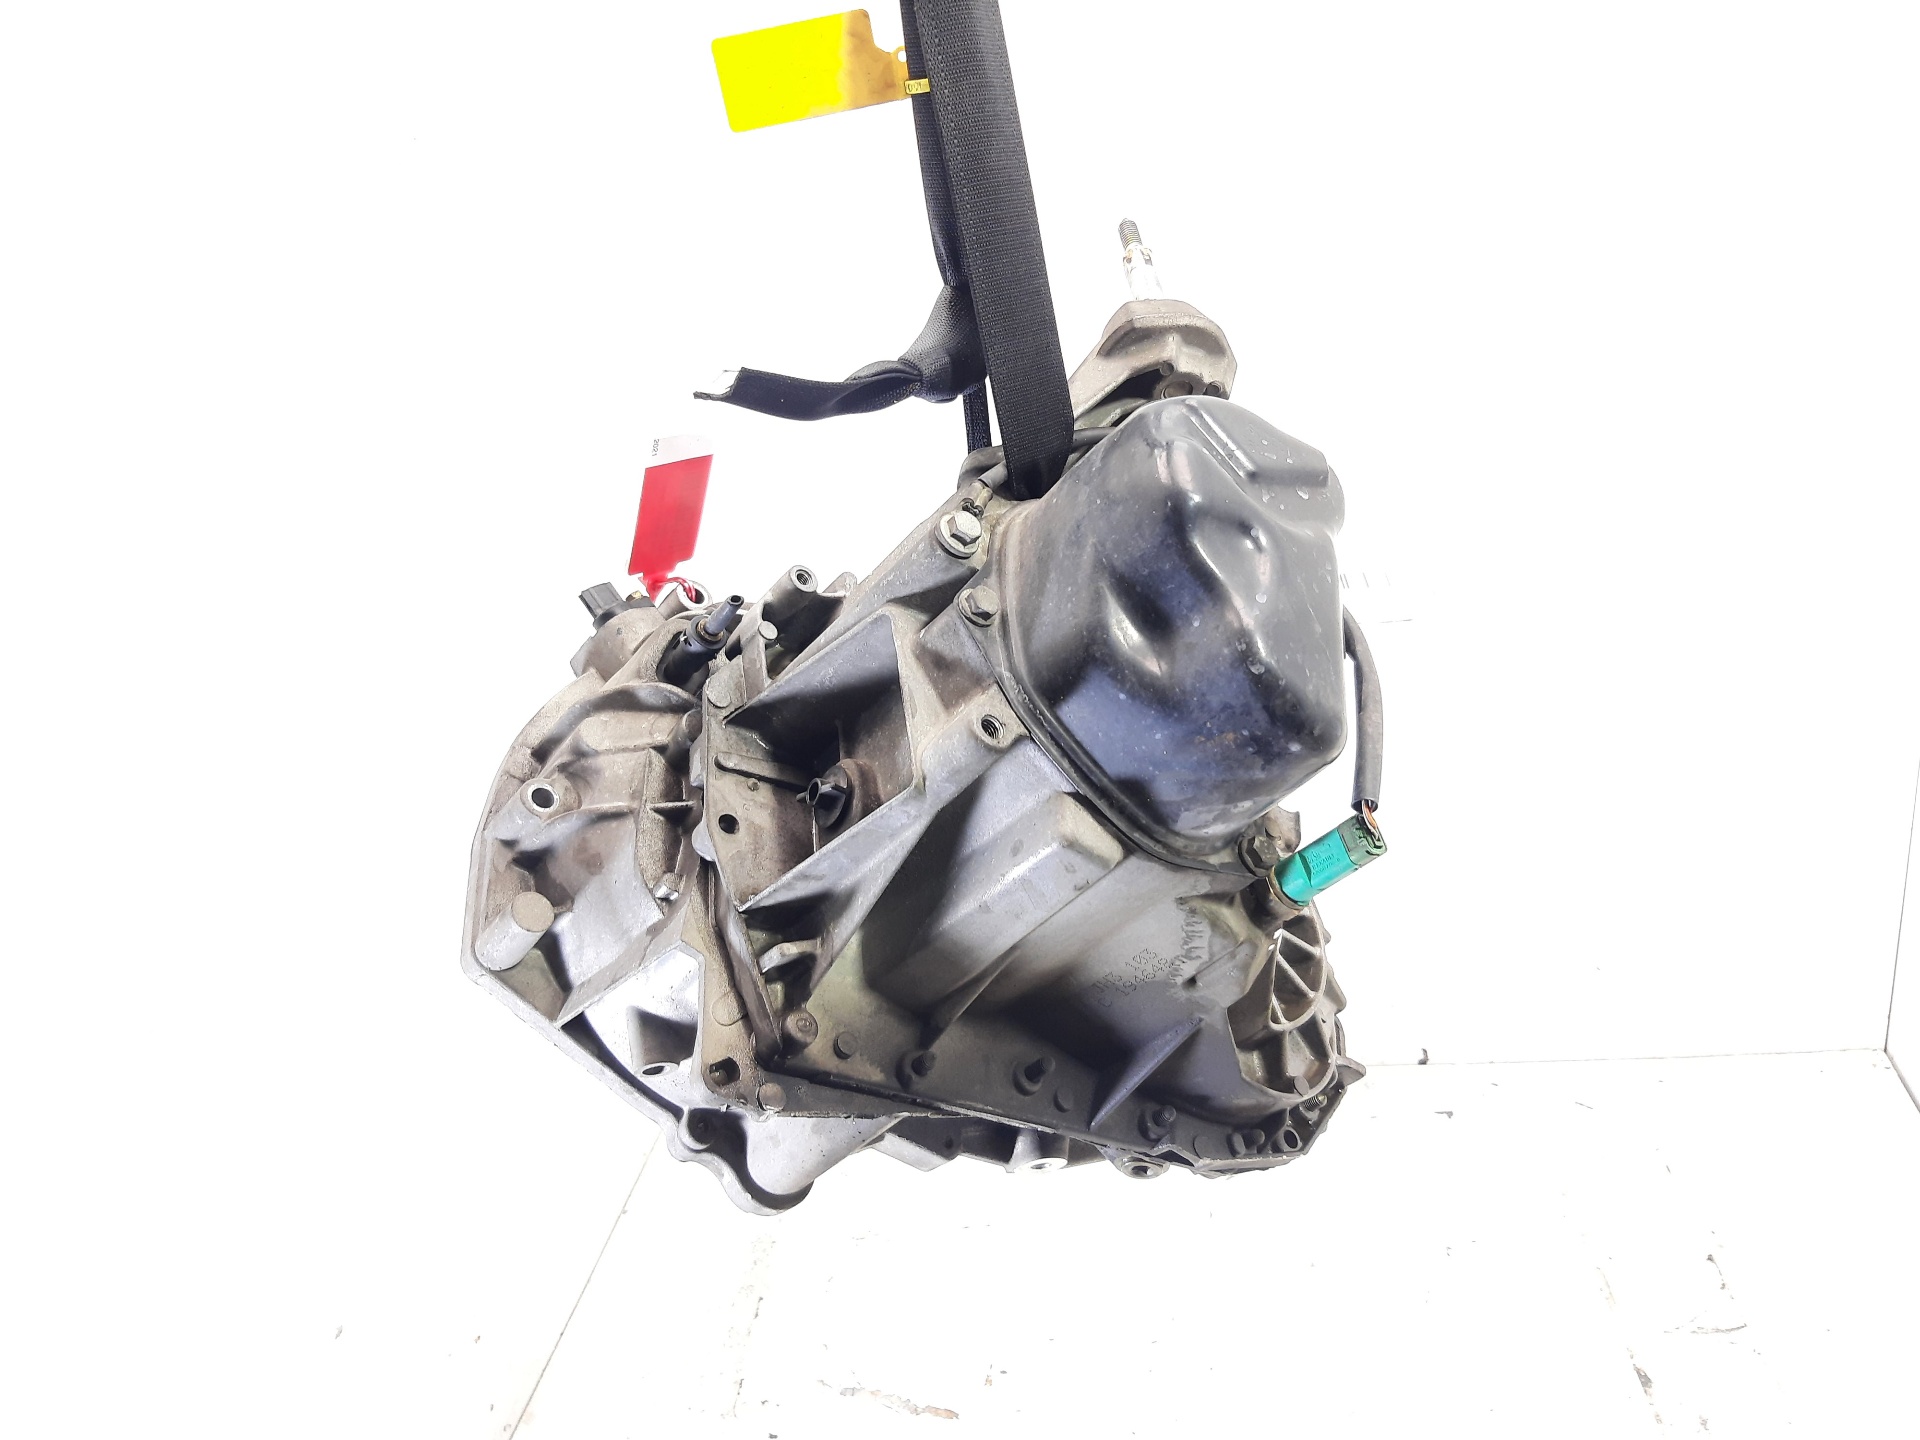 NISSAN Micra K12 (2002-2010) Gearbox JH3103, 5VELOCIDADES 21087683